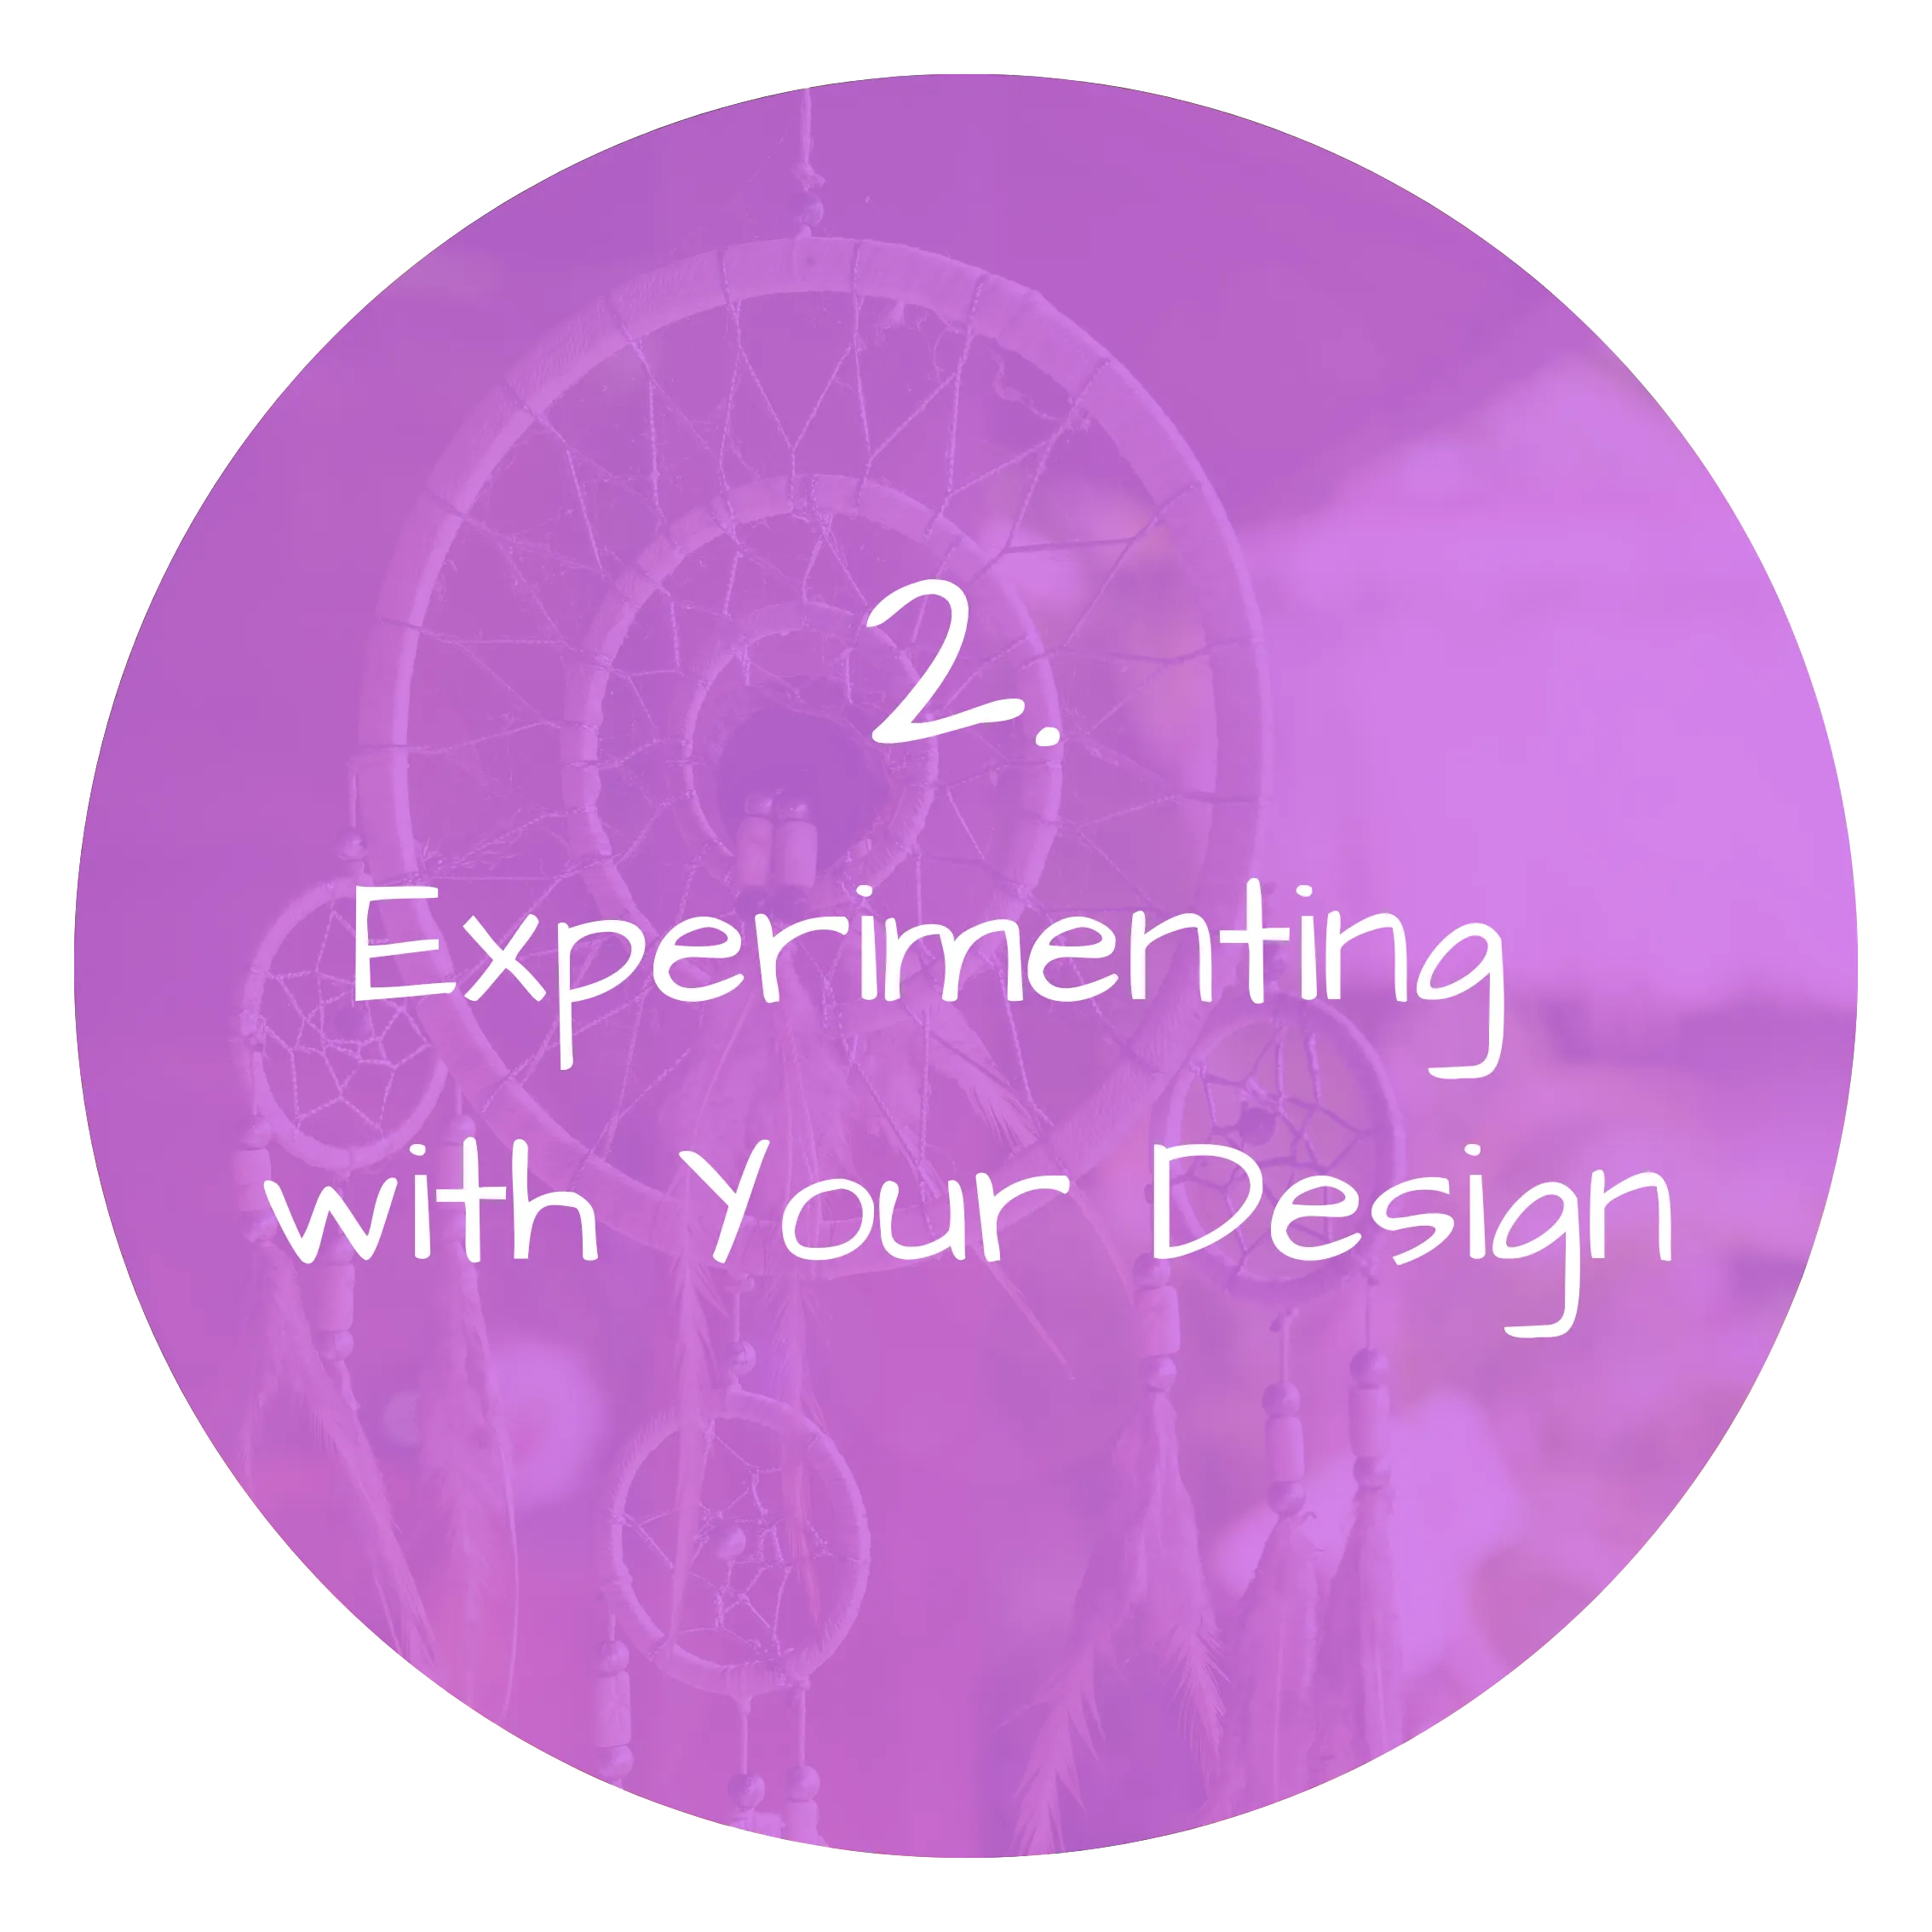 Step 2 - Experimenting with your Human Design